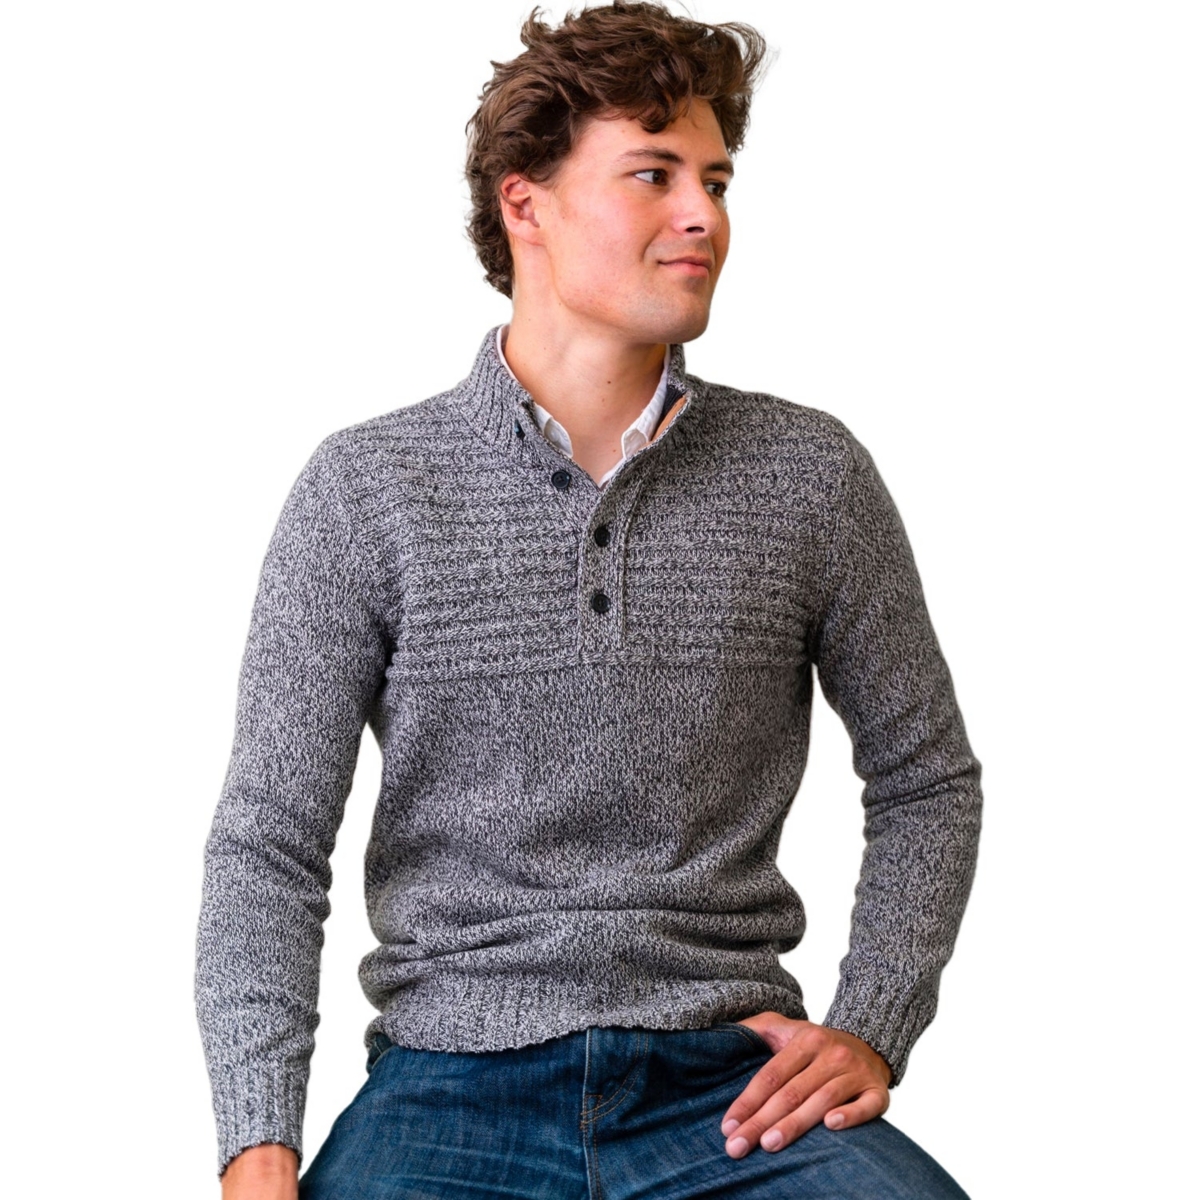 Contrast Sweater with Elbow Patches